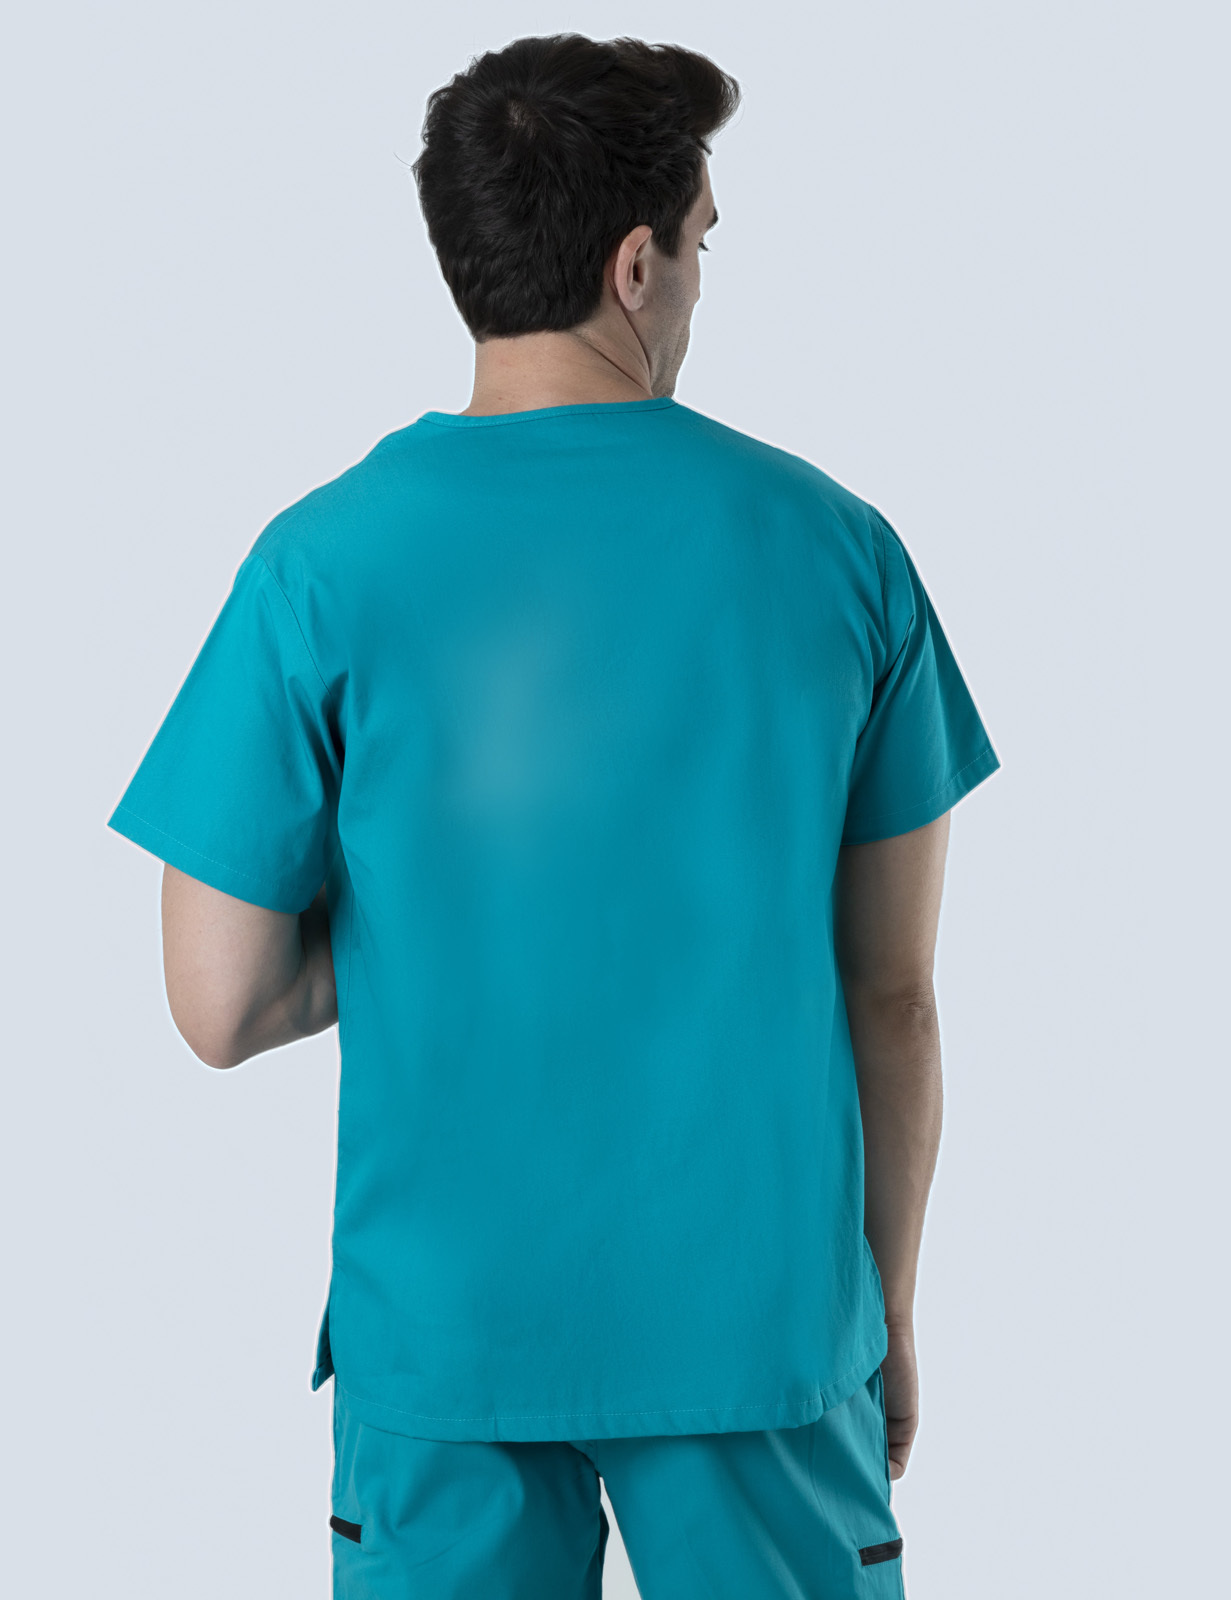 Men's Fit Solid Scrub Top - Teal - XX Small